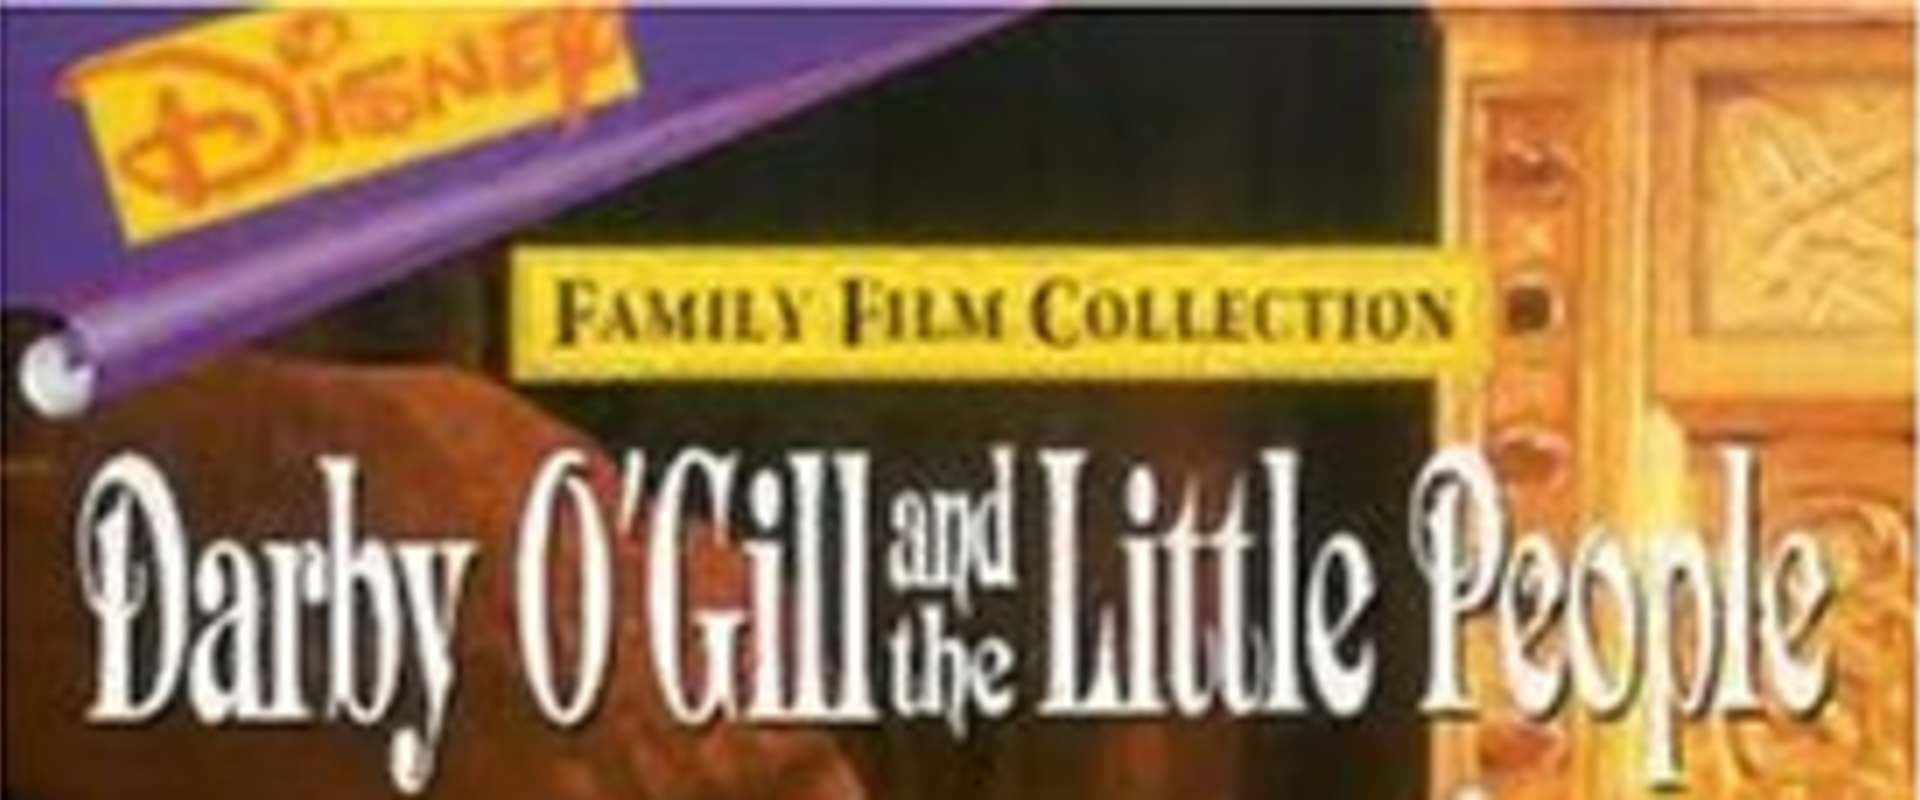 Darby O'Gill and the Little People background 2